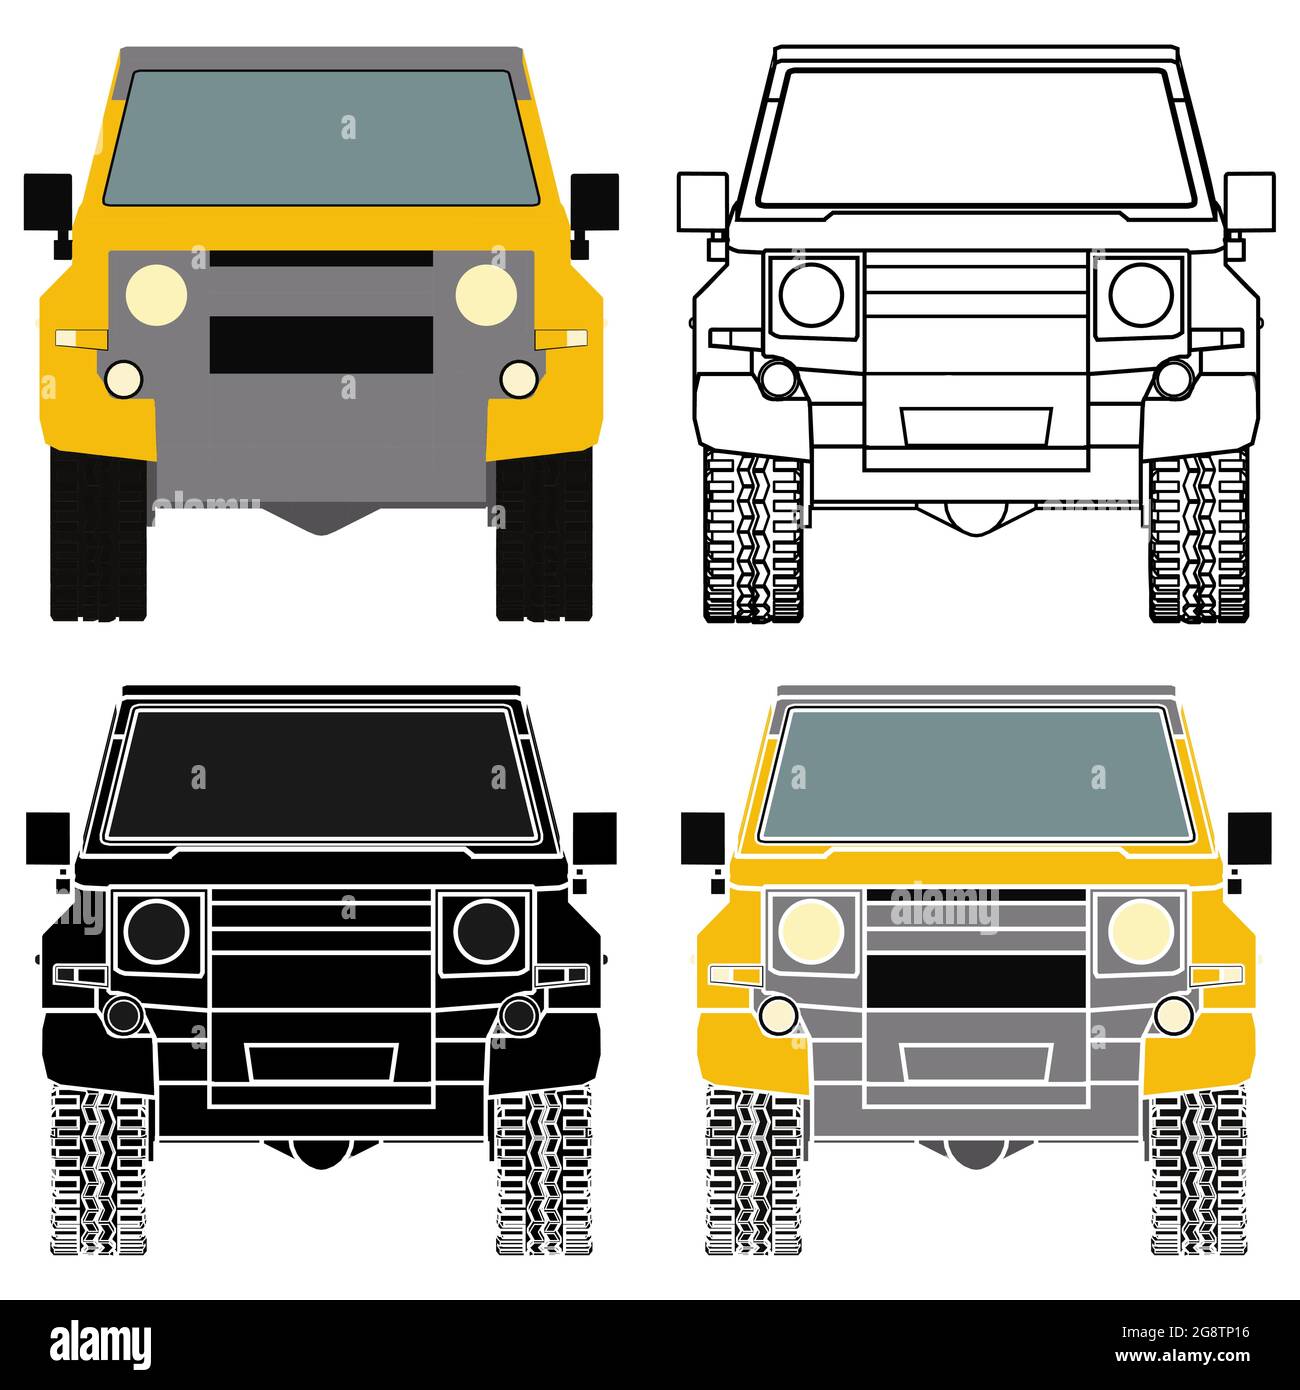 Popular Off-road car 4x4 in front view Stock Vector